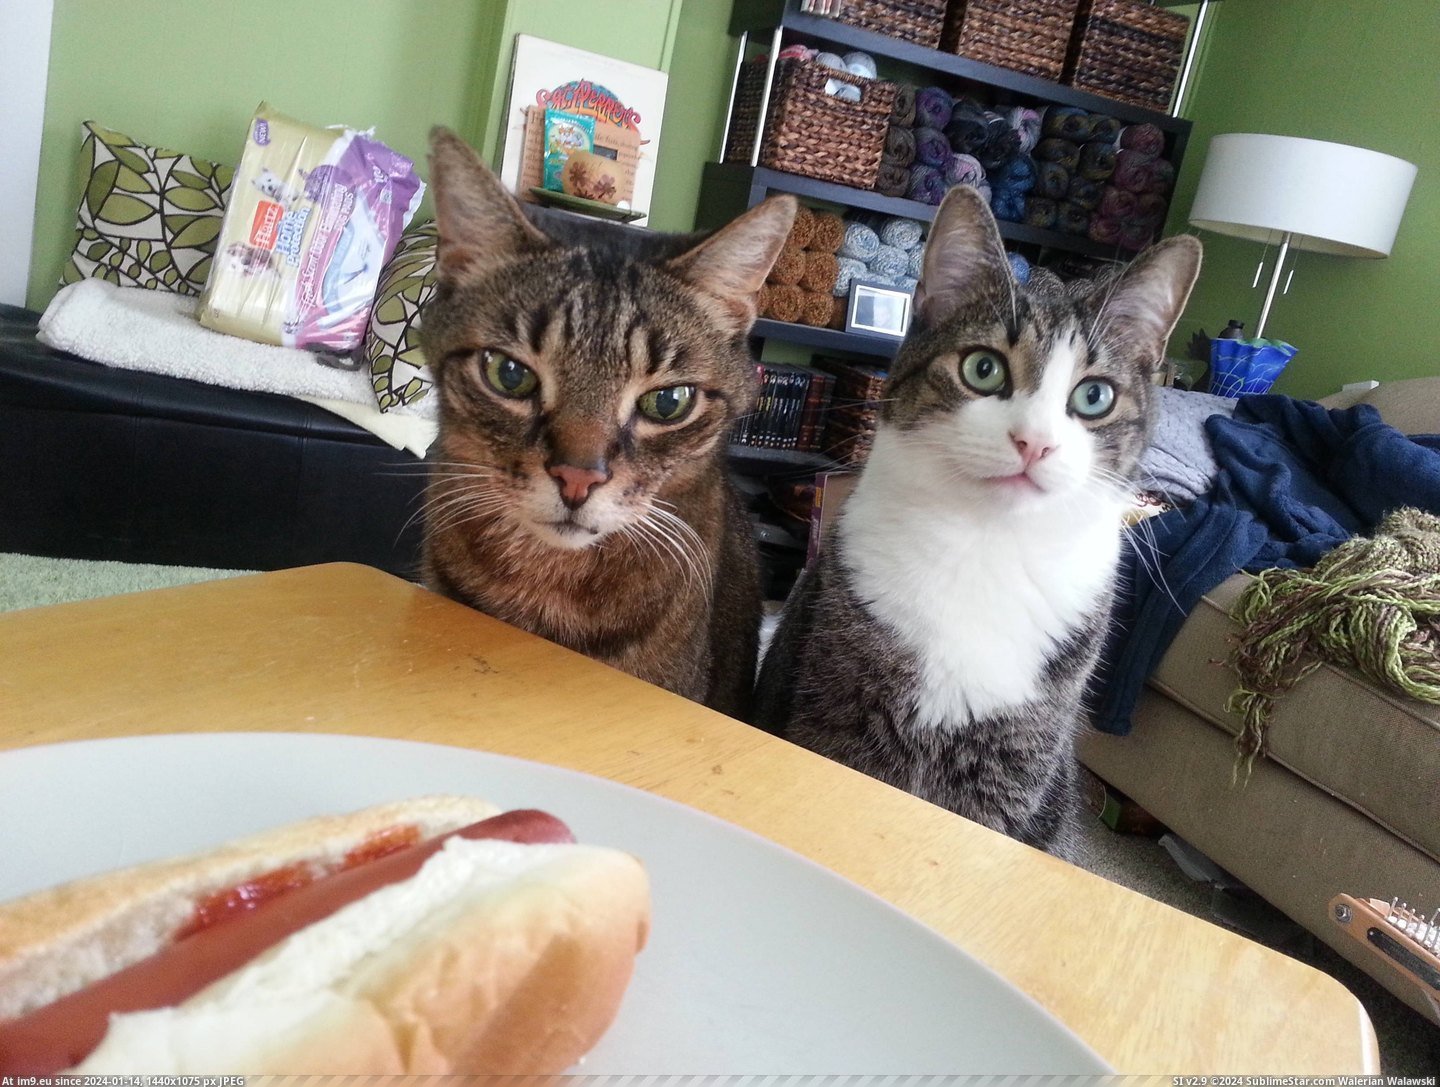 #Hot #Dogs #Cats [Cats] 'You're having hot dogs? We like hot dogs!' Pic. (Bild von album My r/CATS favs))